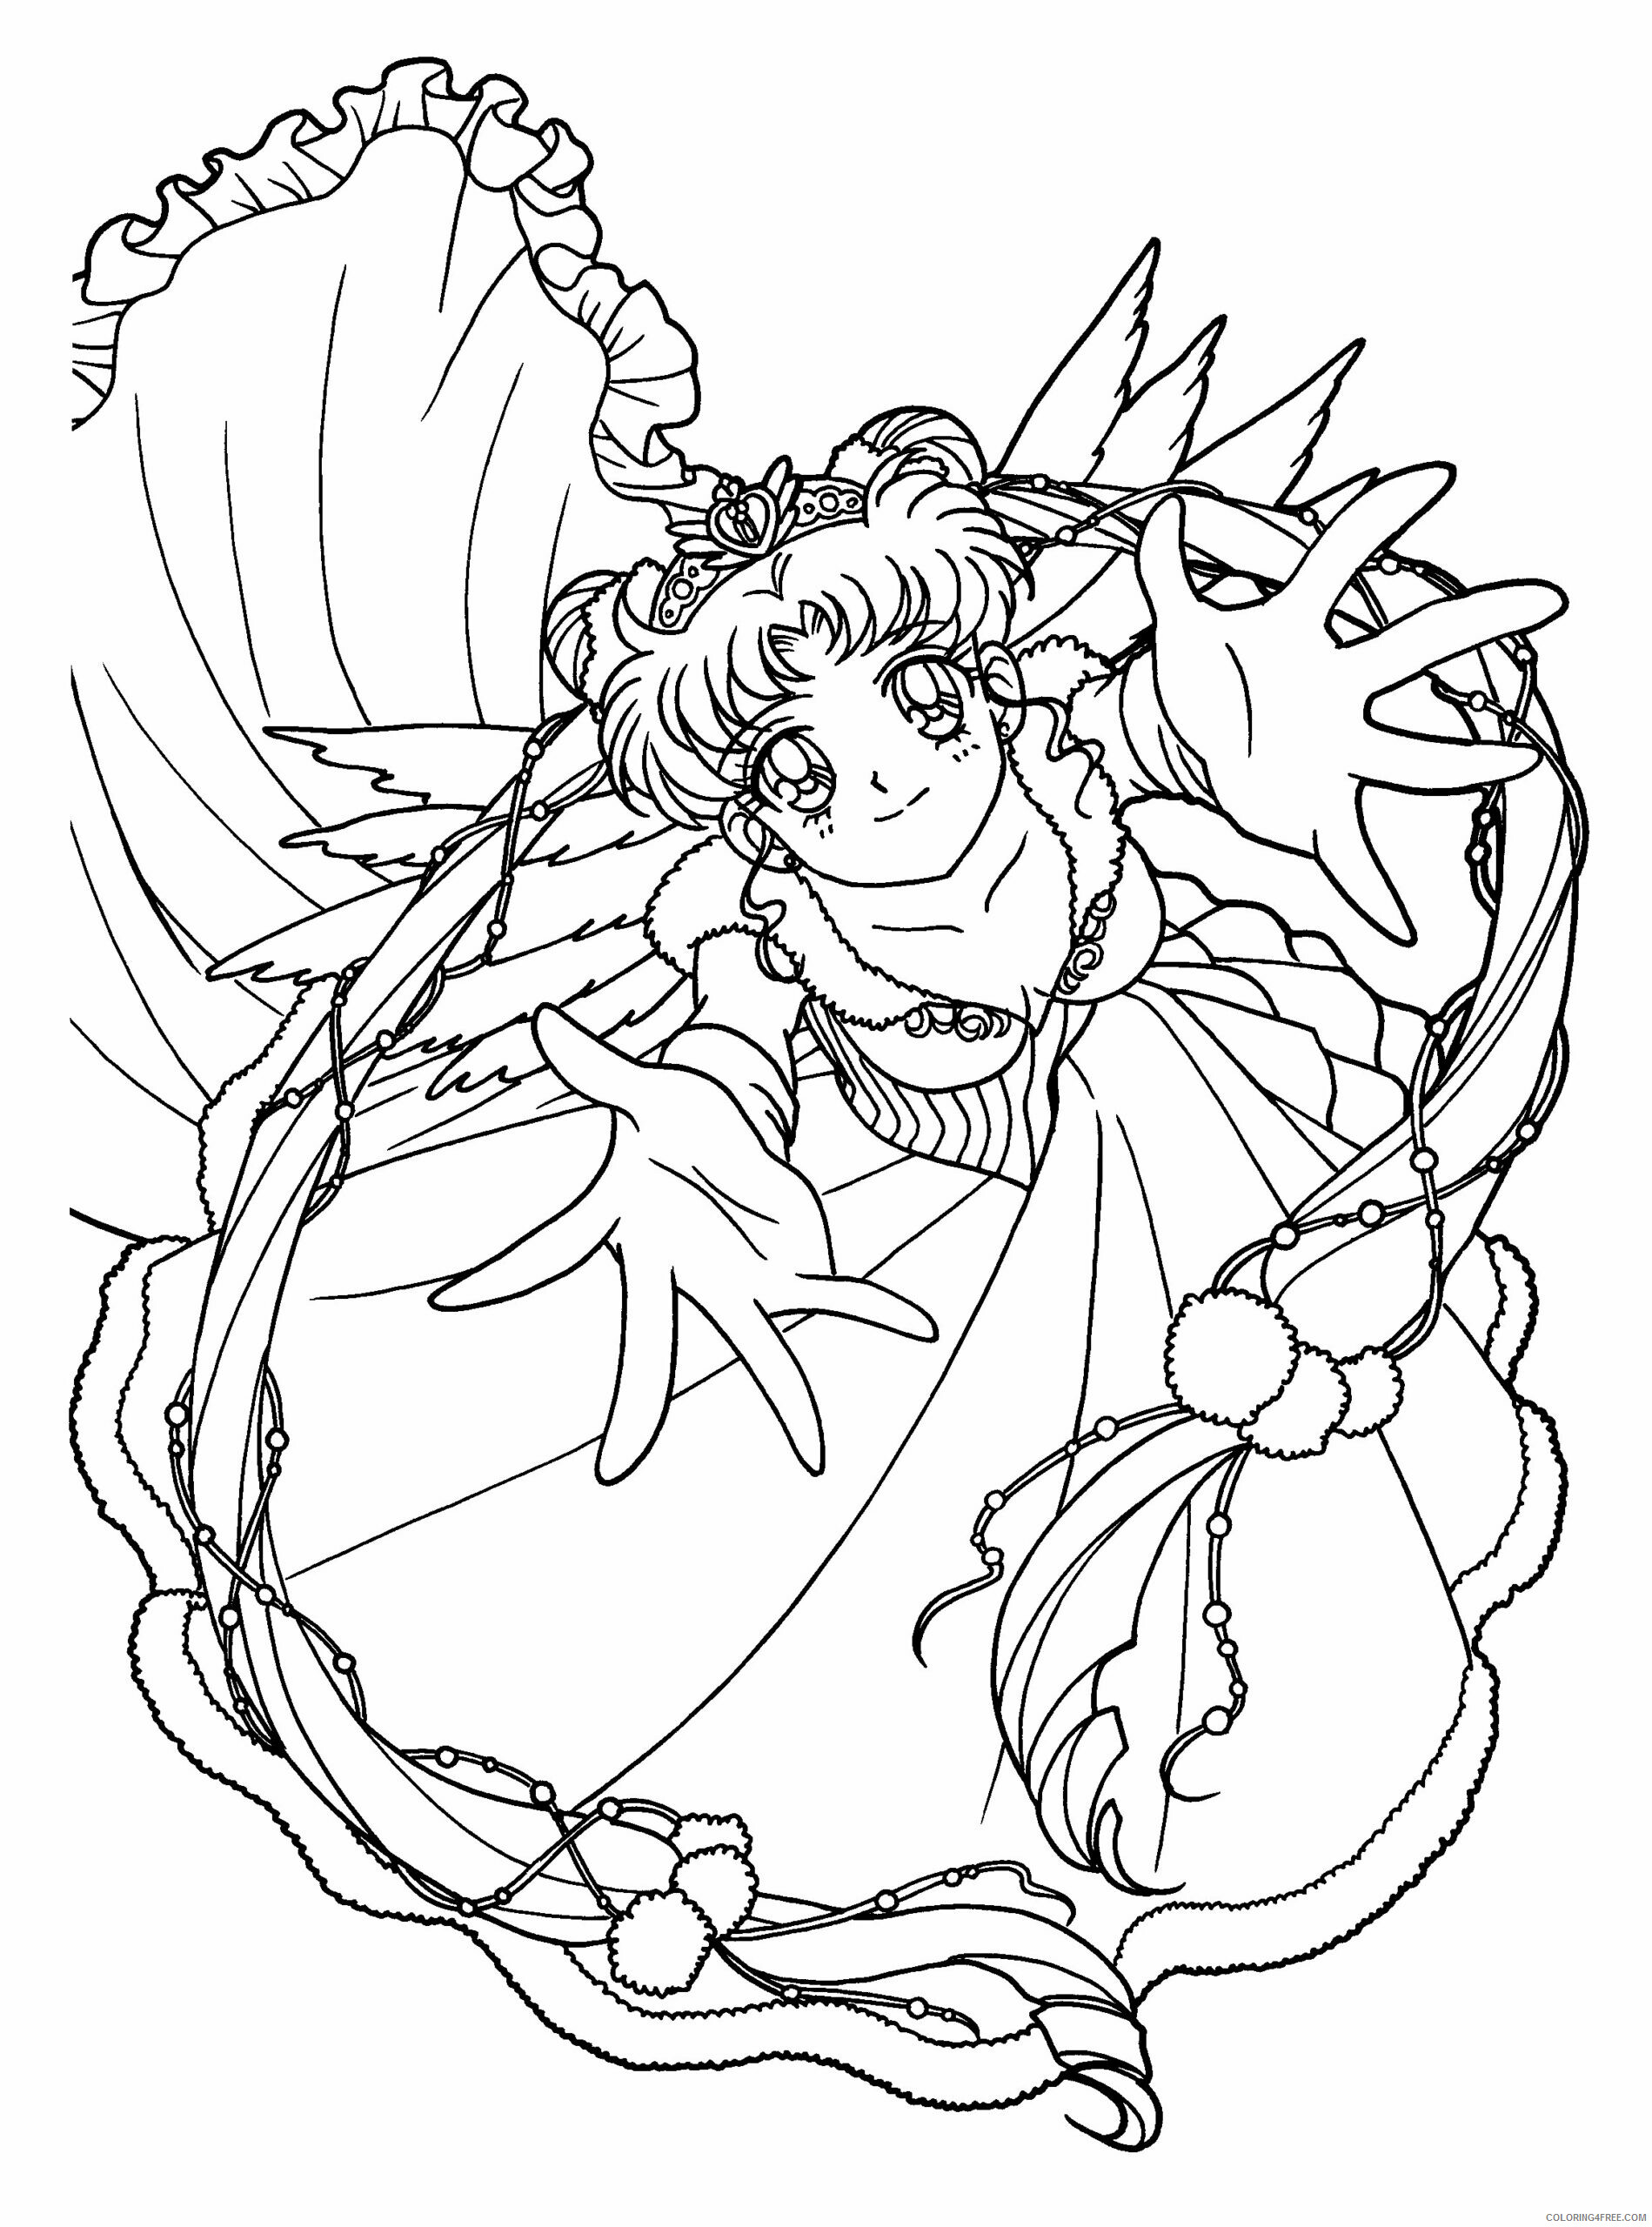 Sailor Moon Printable Coloring Pages Anime sailormoon NiZPL 2021 0991 Coloring4free